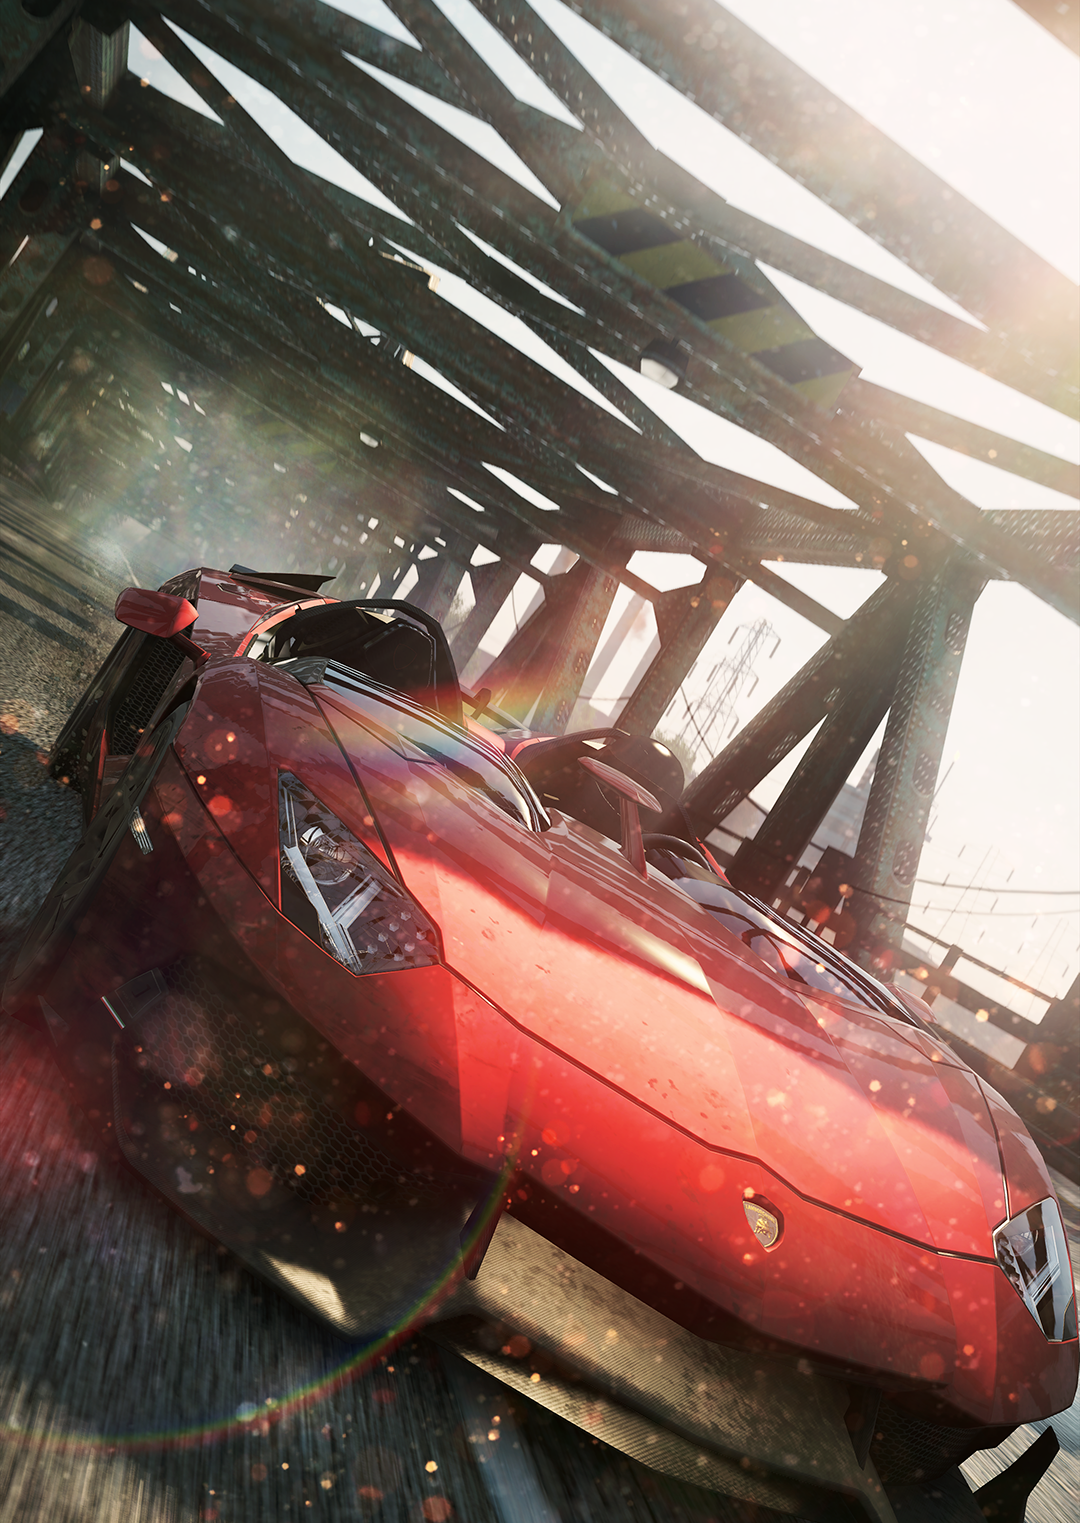 nfs13_2013_08_15_04_23_53_675_by_roderickartist-d6i8h6y.png